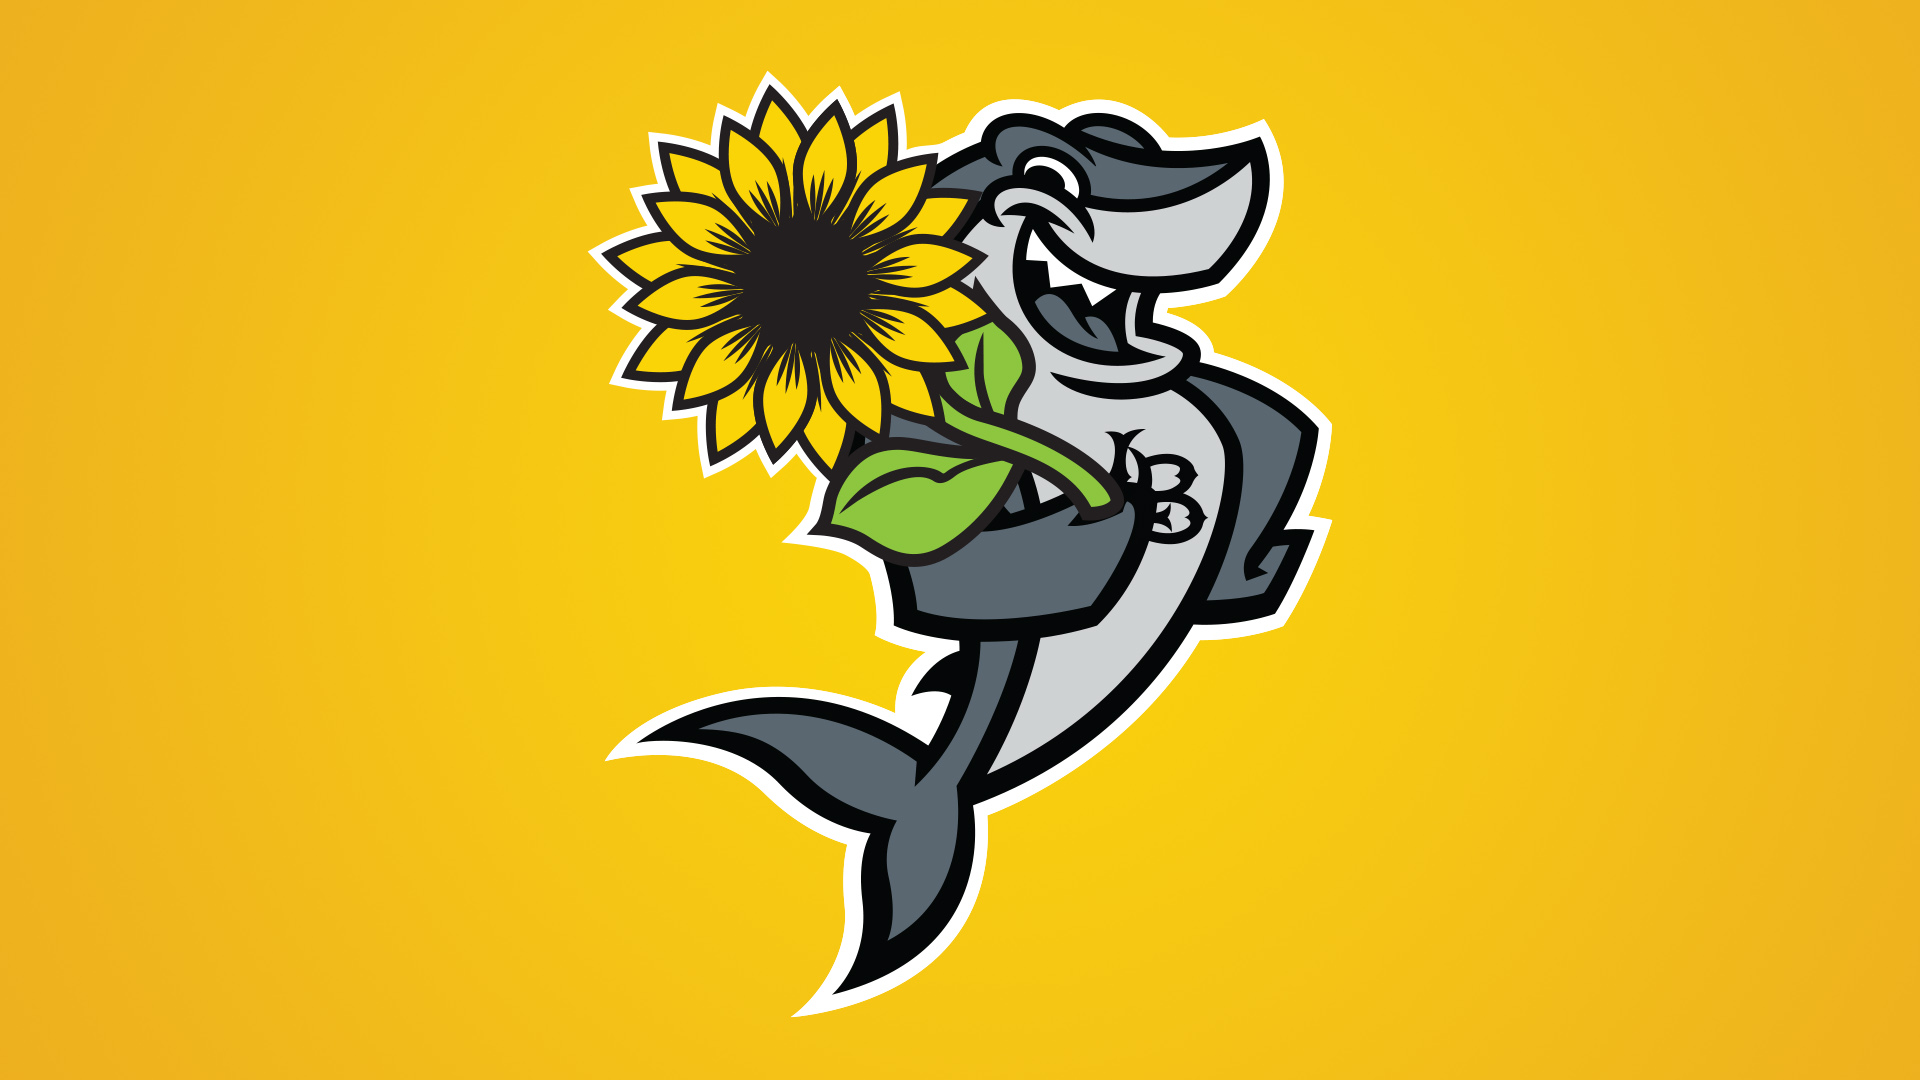 's mascot Elbee the Shark holds a sunflower. The sunflower symbol allows students, staff and faculty to identify an individual with a hidden disability who would benefit from understanding, inclusivity and support.